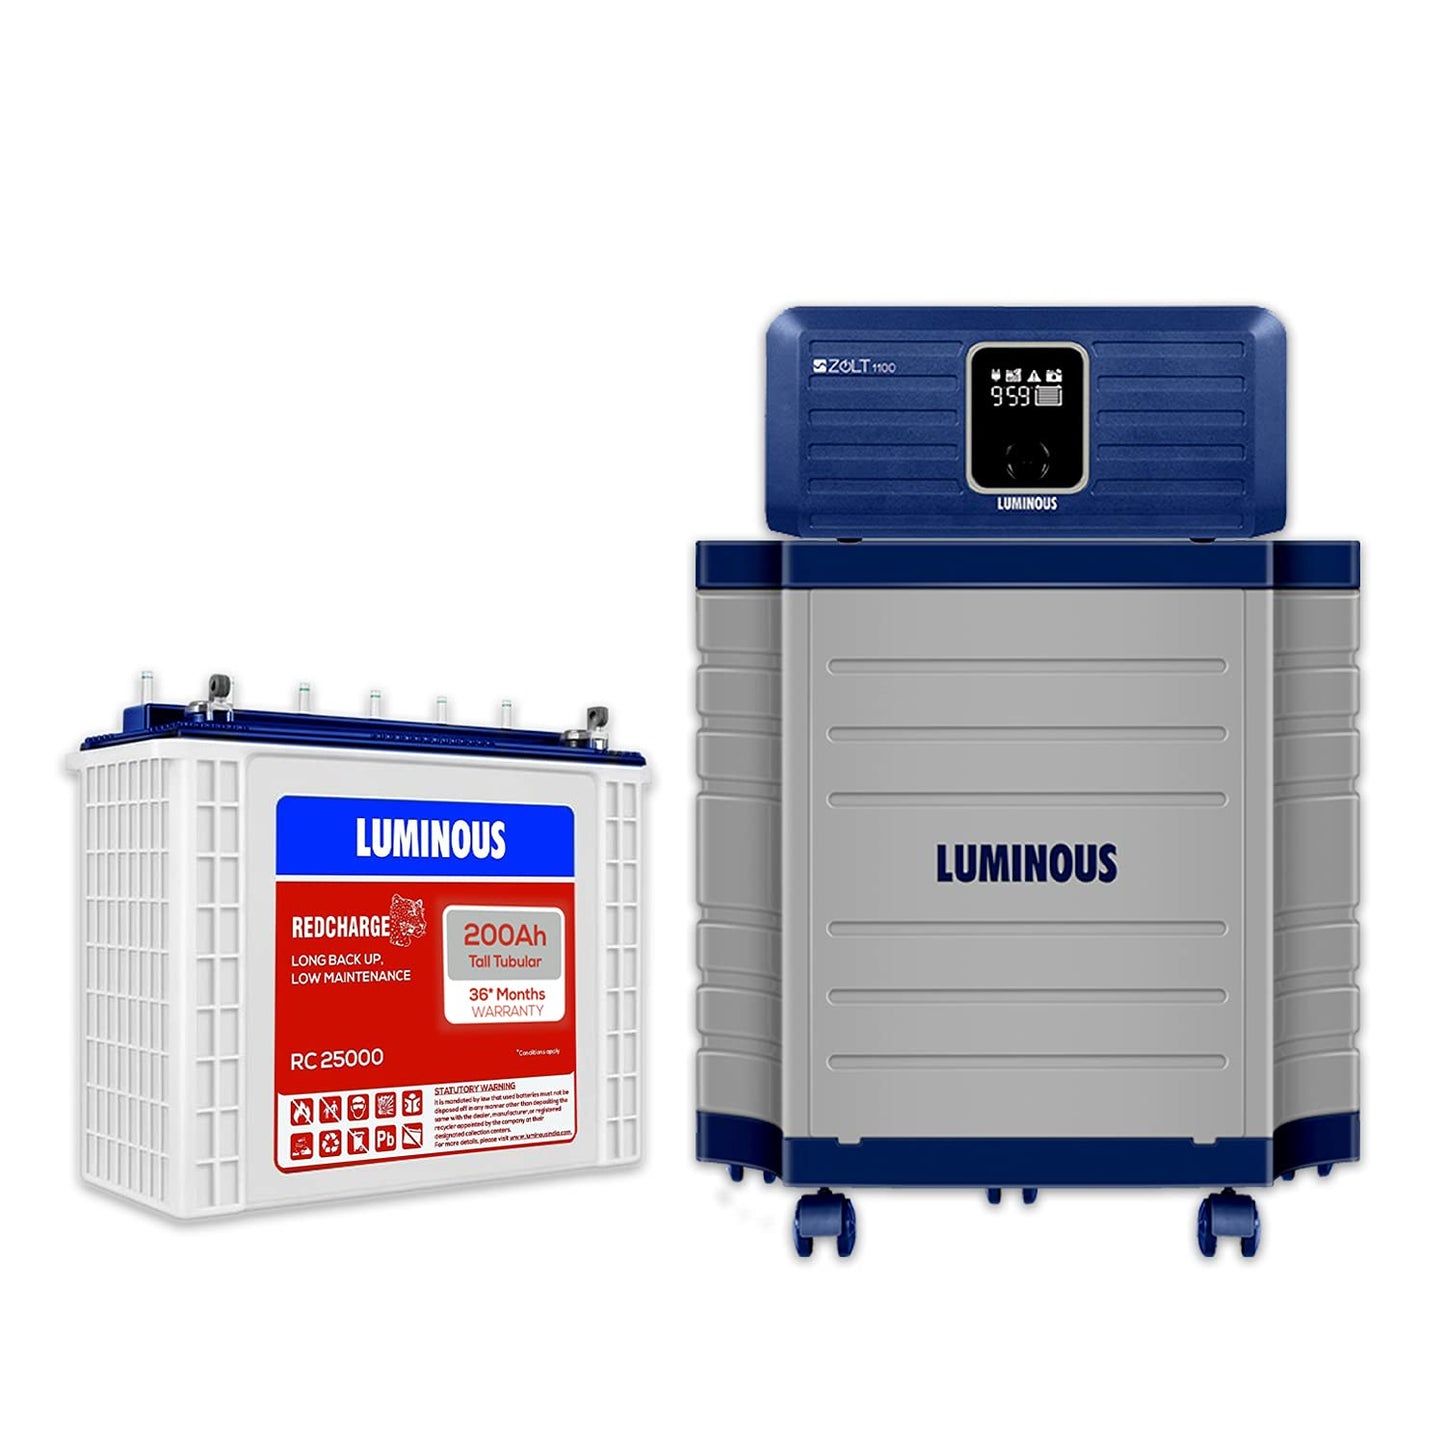 Luminous Zolt 1100 Sine Wave Inverter With RC25000 200 Ah Tall Tubular Battery and Trolley